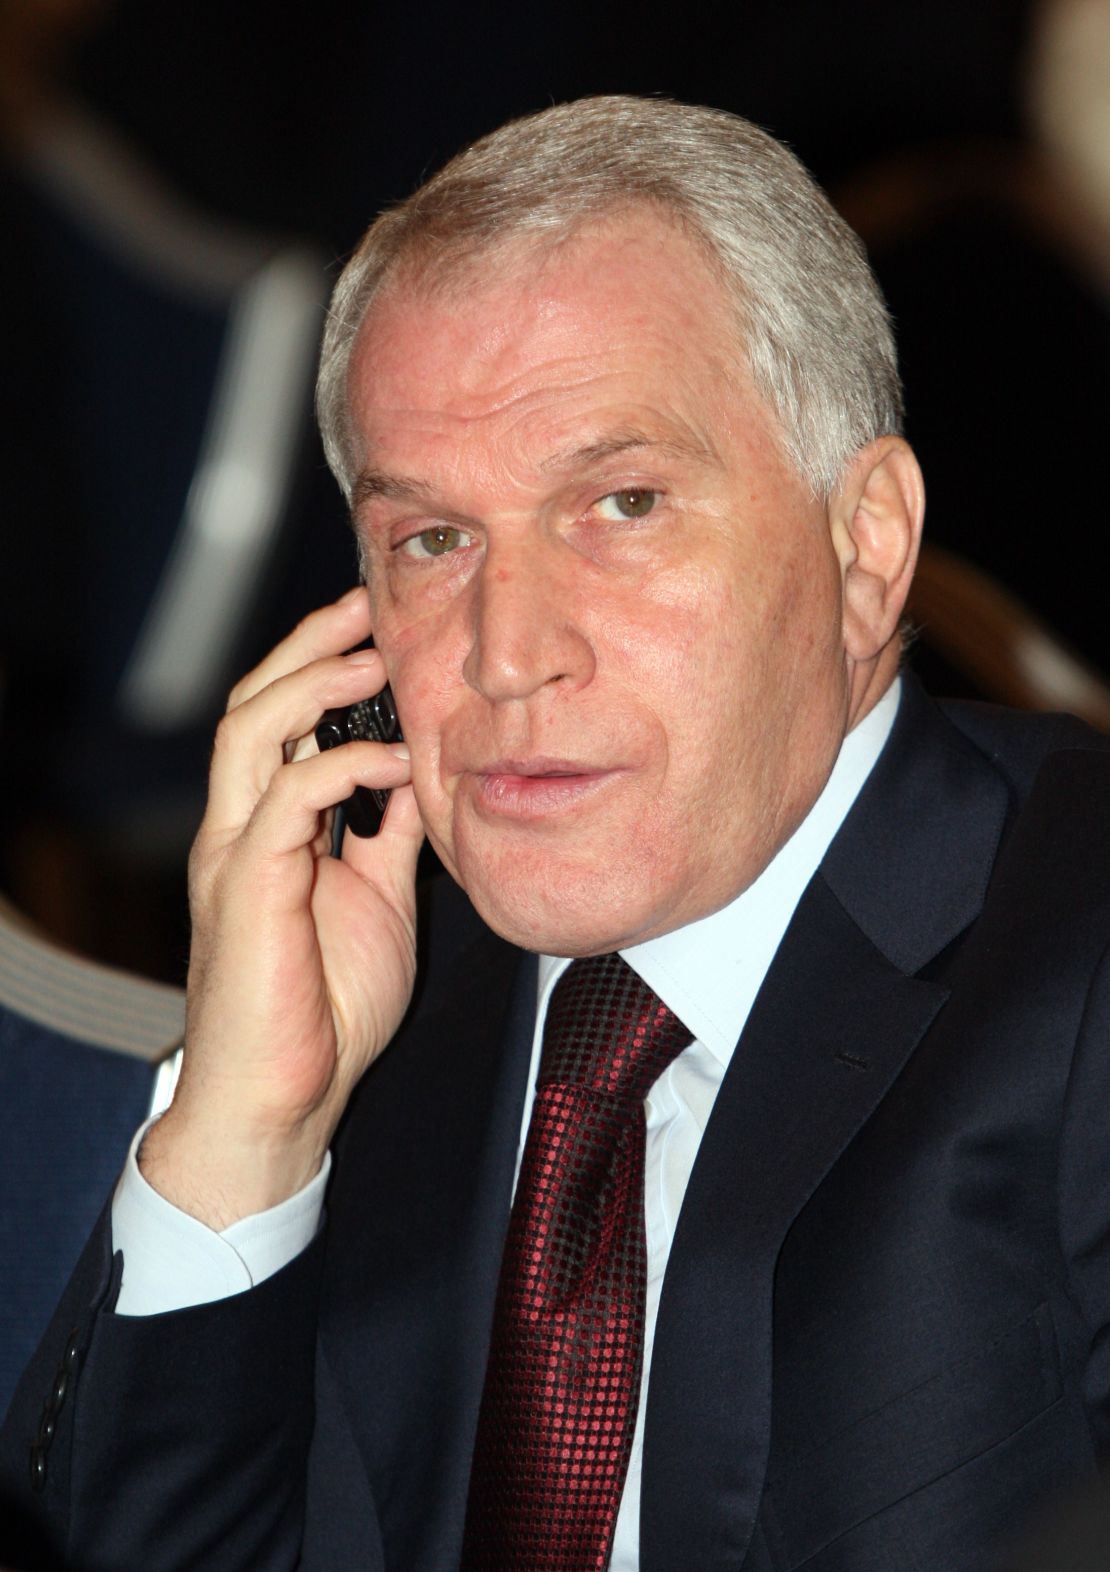 Bank Rossiya chairman and main shareholder Yuri Kovalchuk, pictured in 2010, is subject to US sanctions.